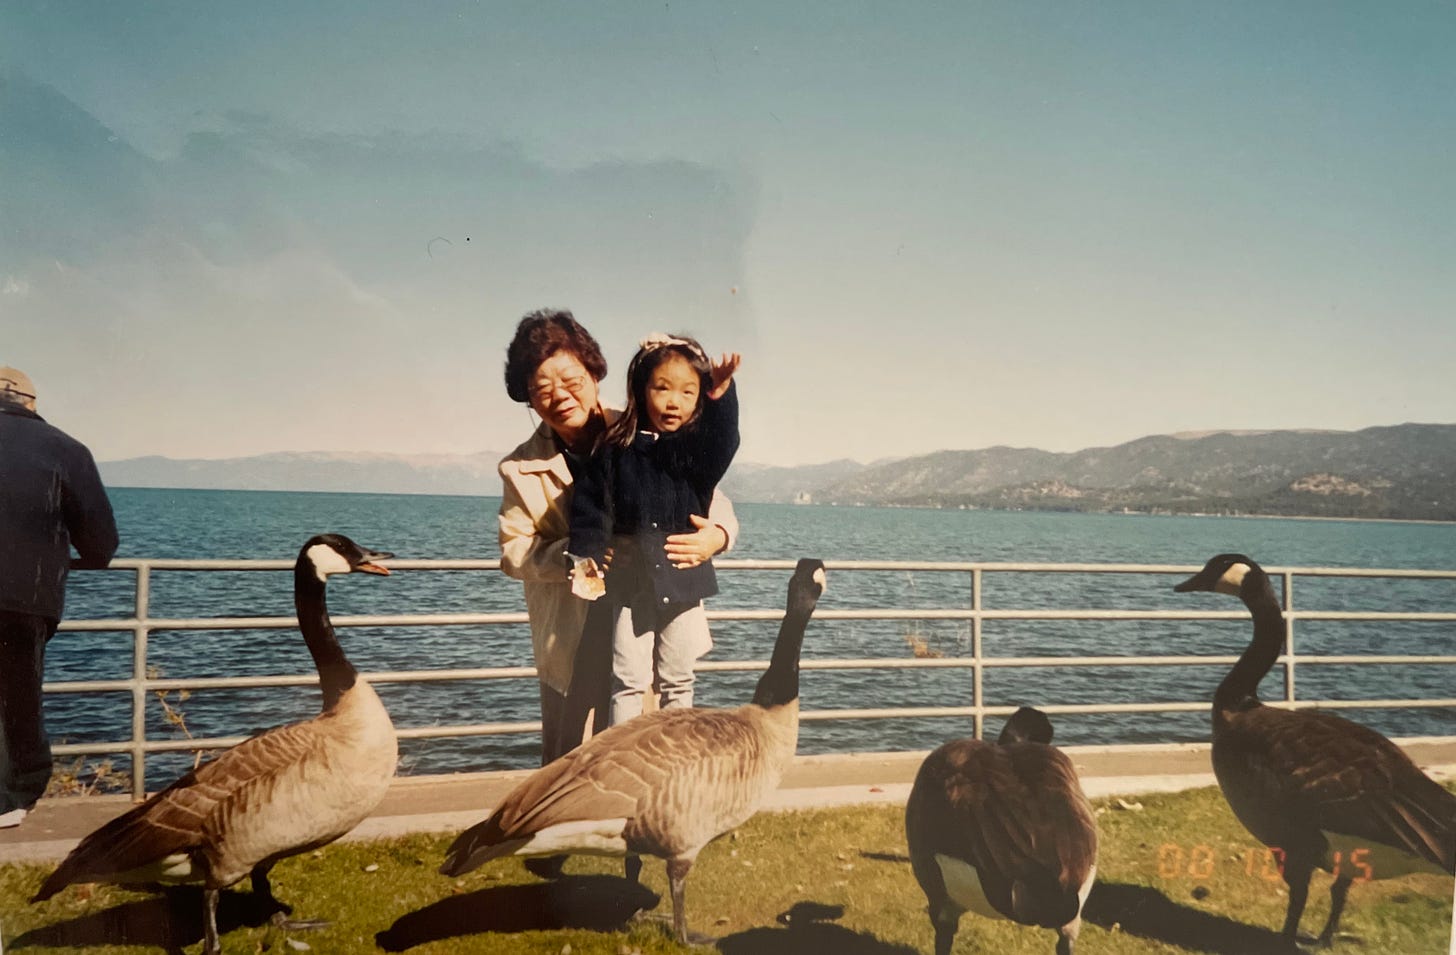 small 4 year old girl wearing headband, navy cardigan, grey leggings. she is standing on a ledge being held by her grandmother as she tosses up a piece of food in the air. they are surrounded by 4 geese standing in grass, and behind them all is blue rippled water, blue sky, and some mountains.